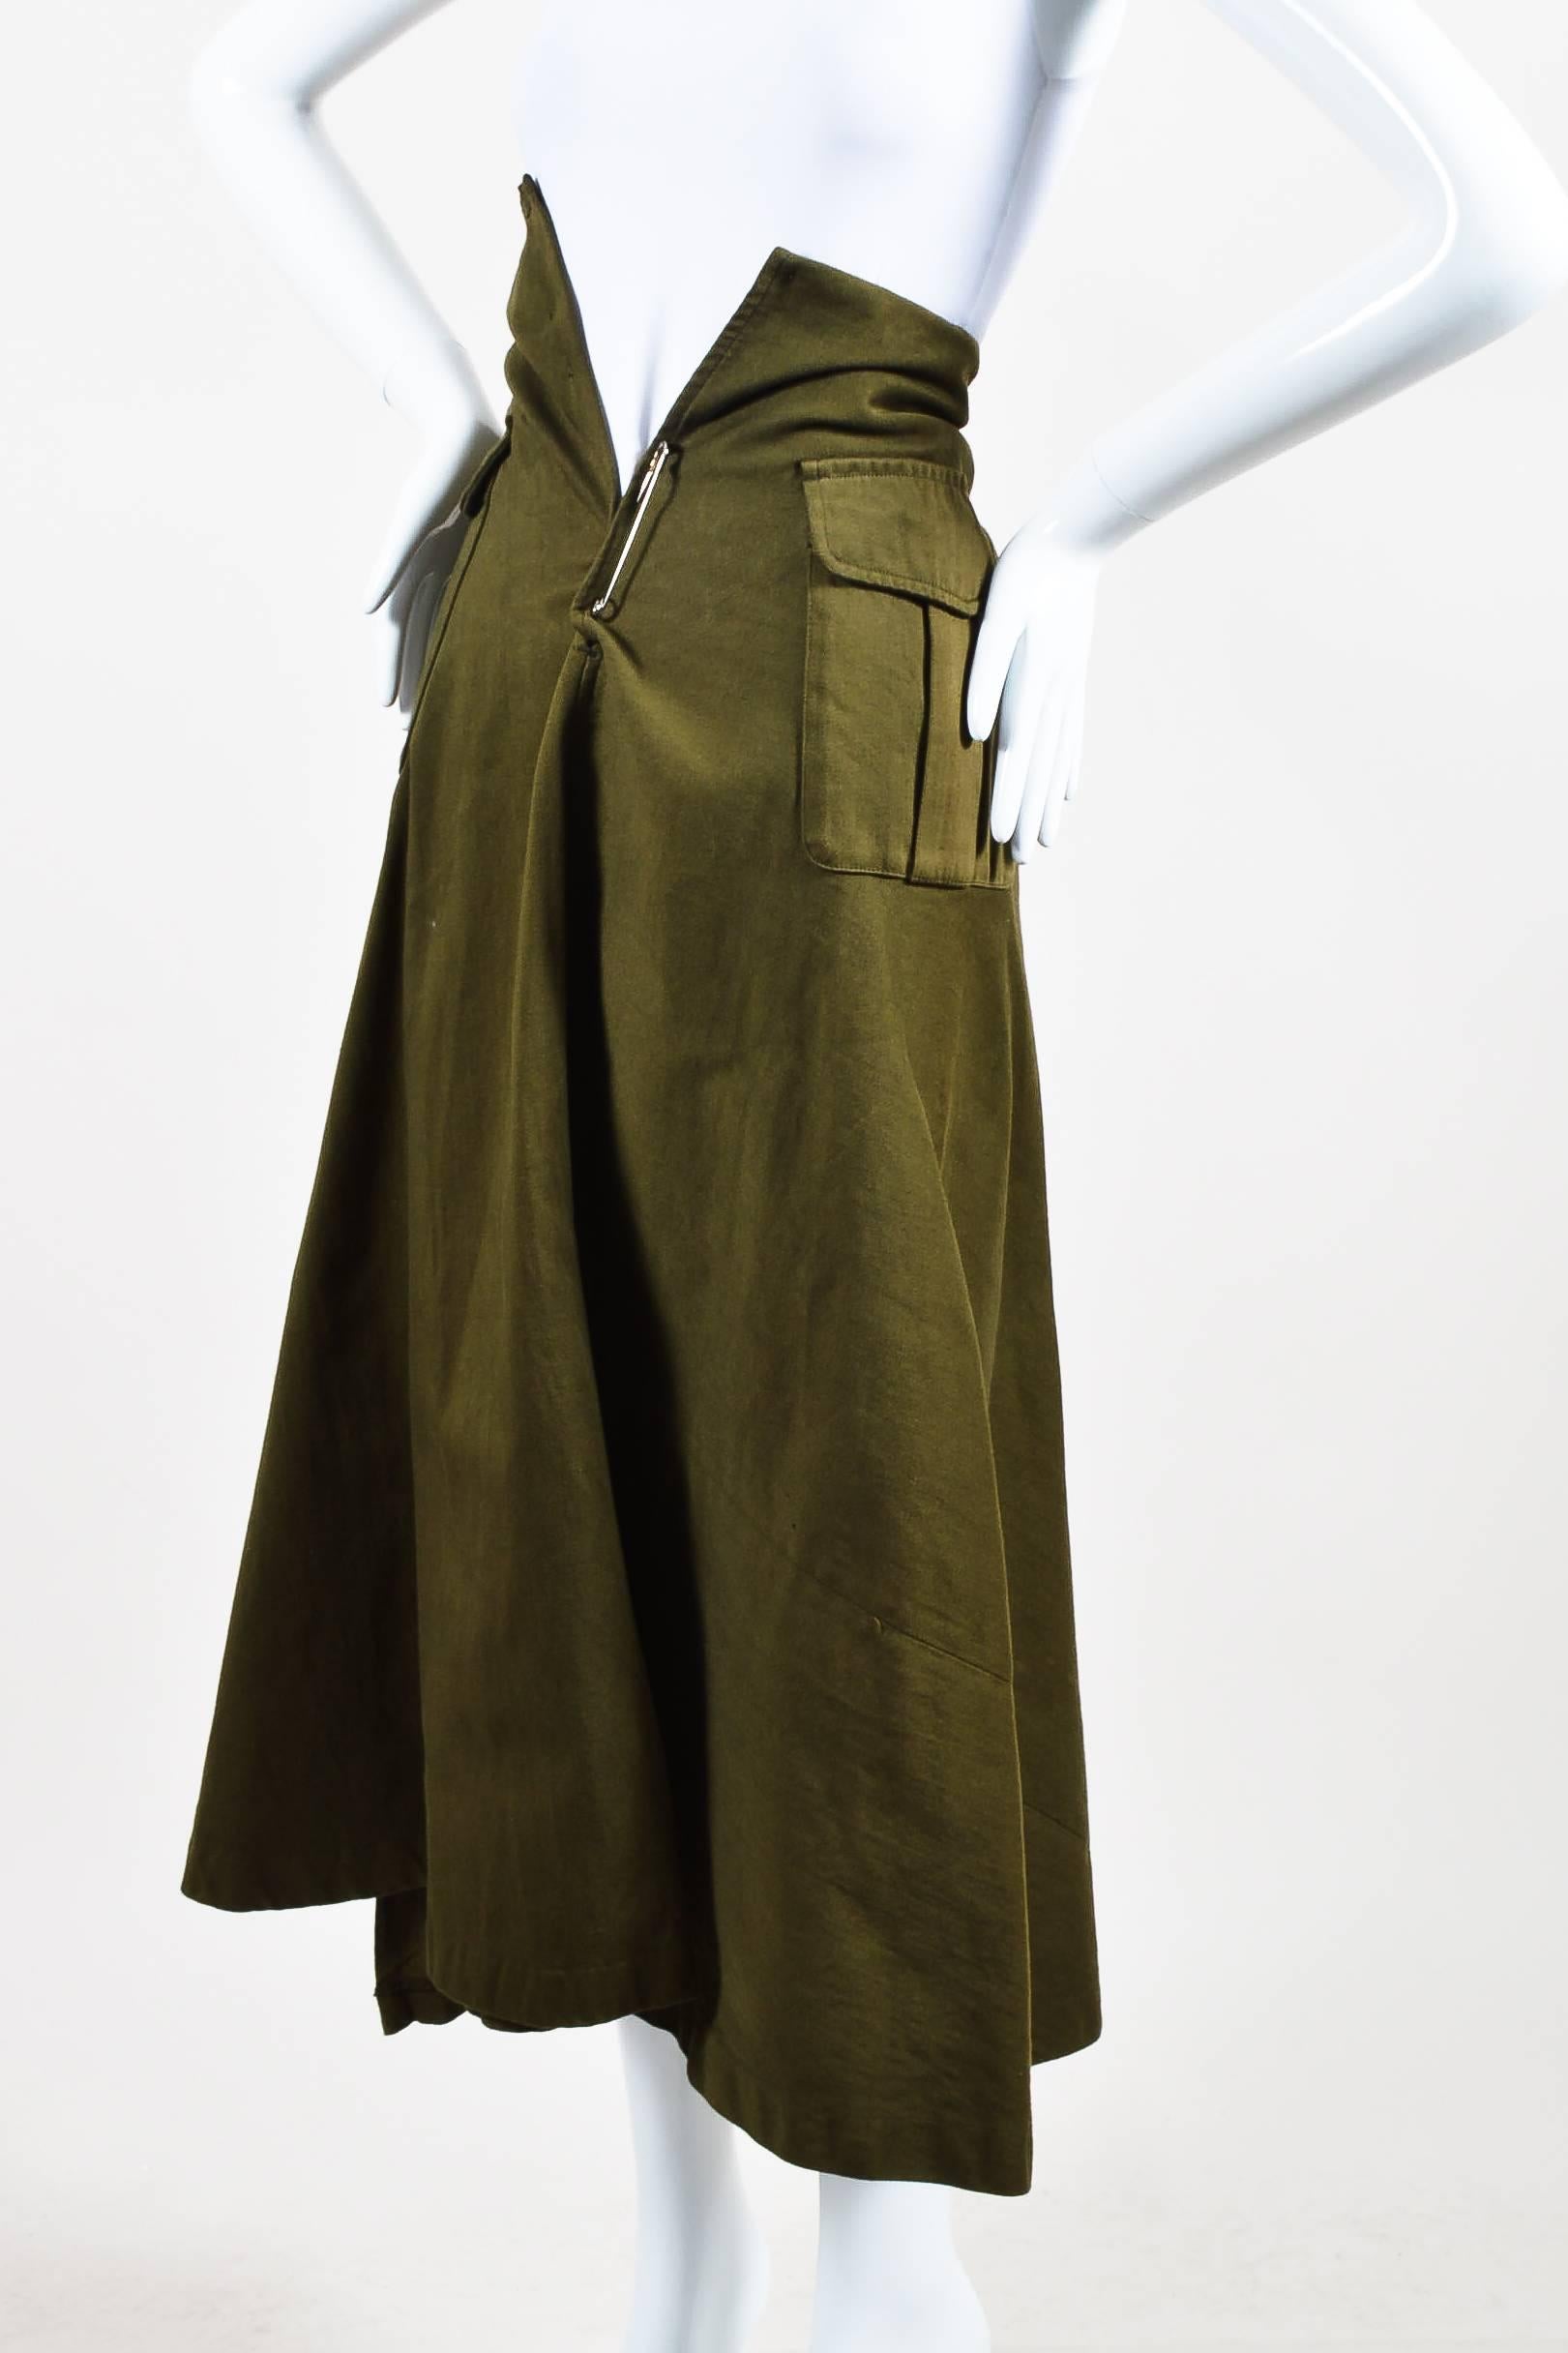 Vintage a-line skirt. Constructed of cotton. Army green. Flap pockets. Large safety pin fastening in front. Lined.